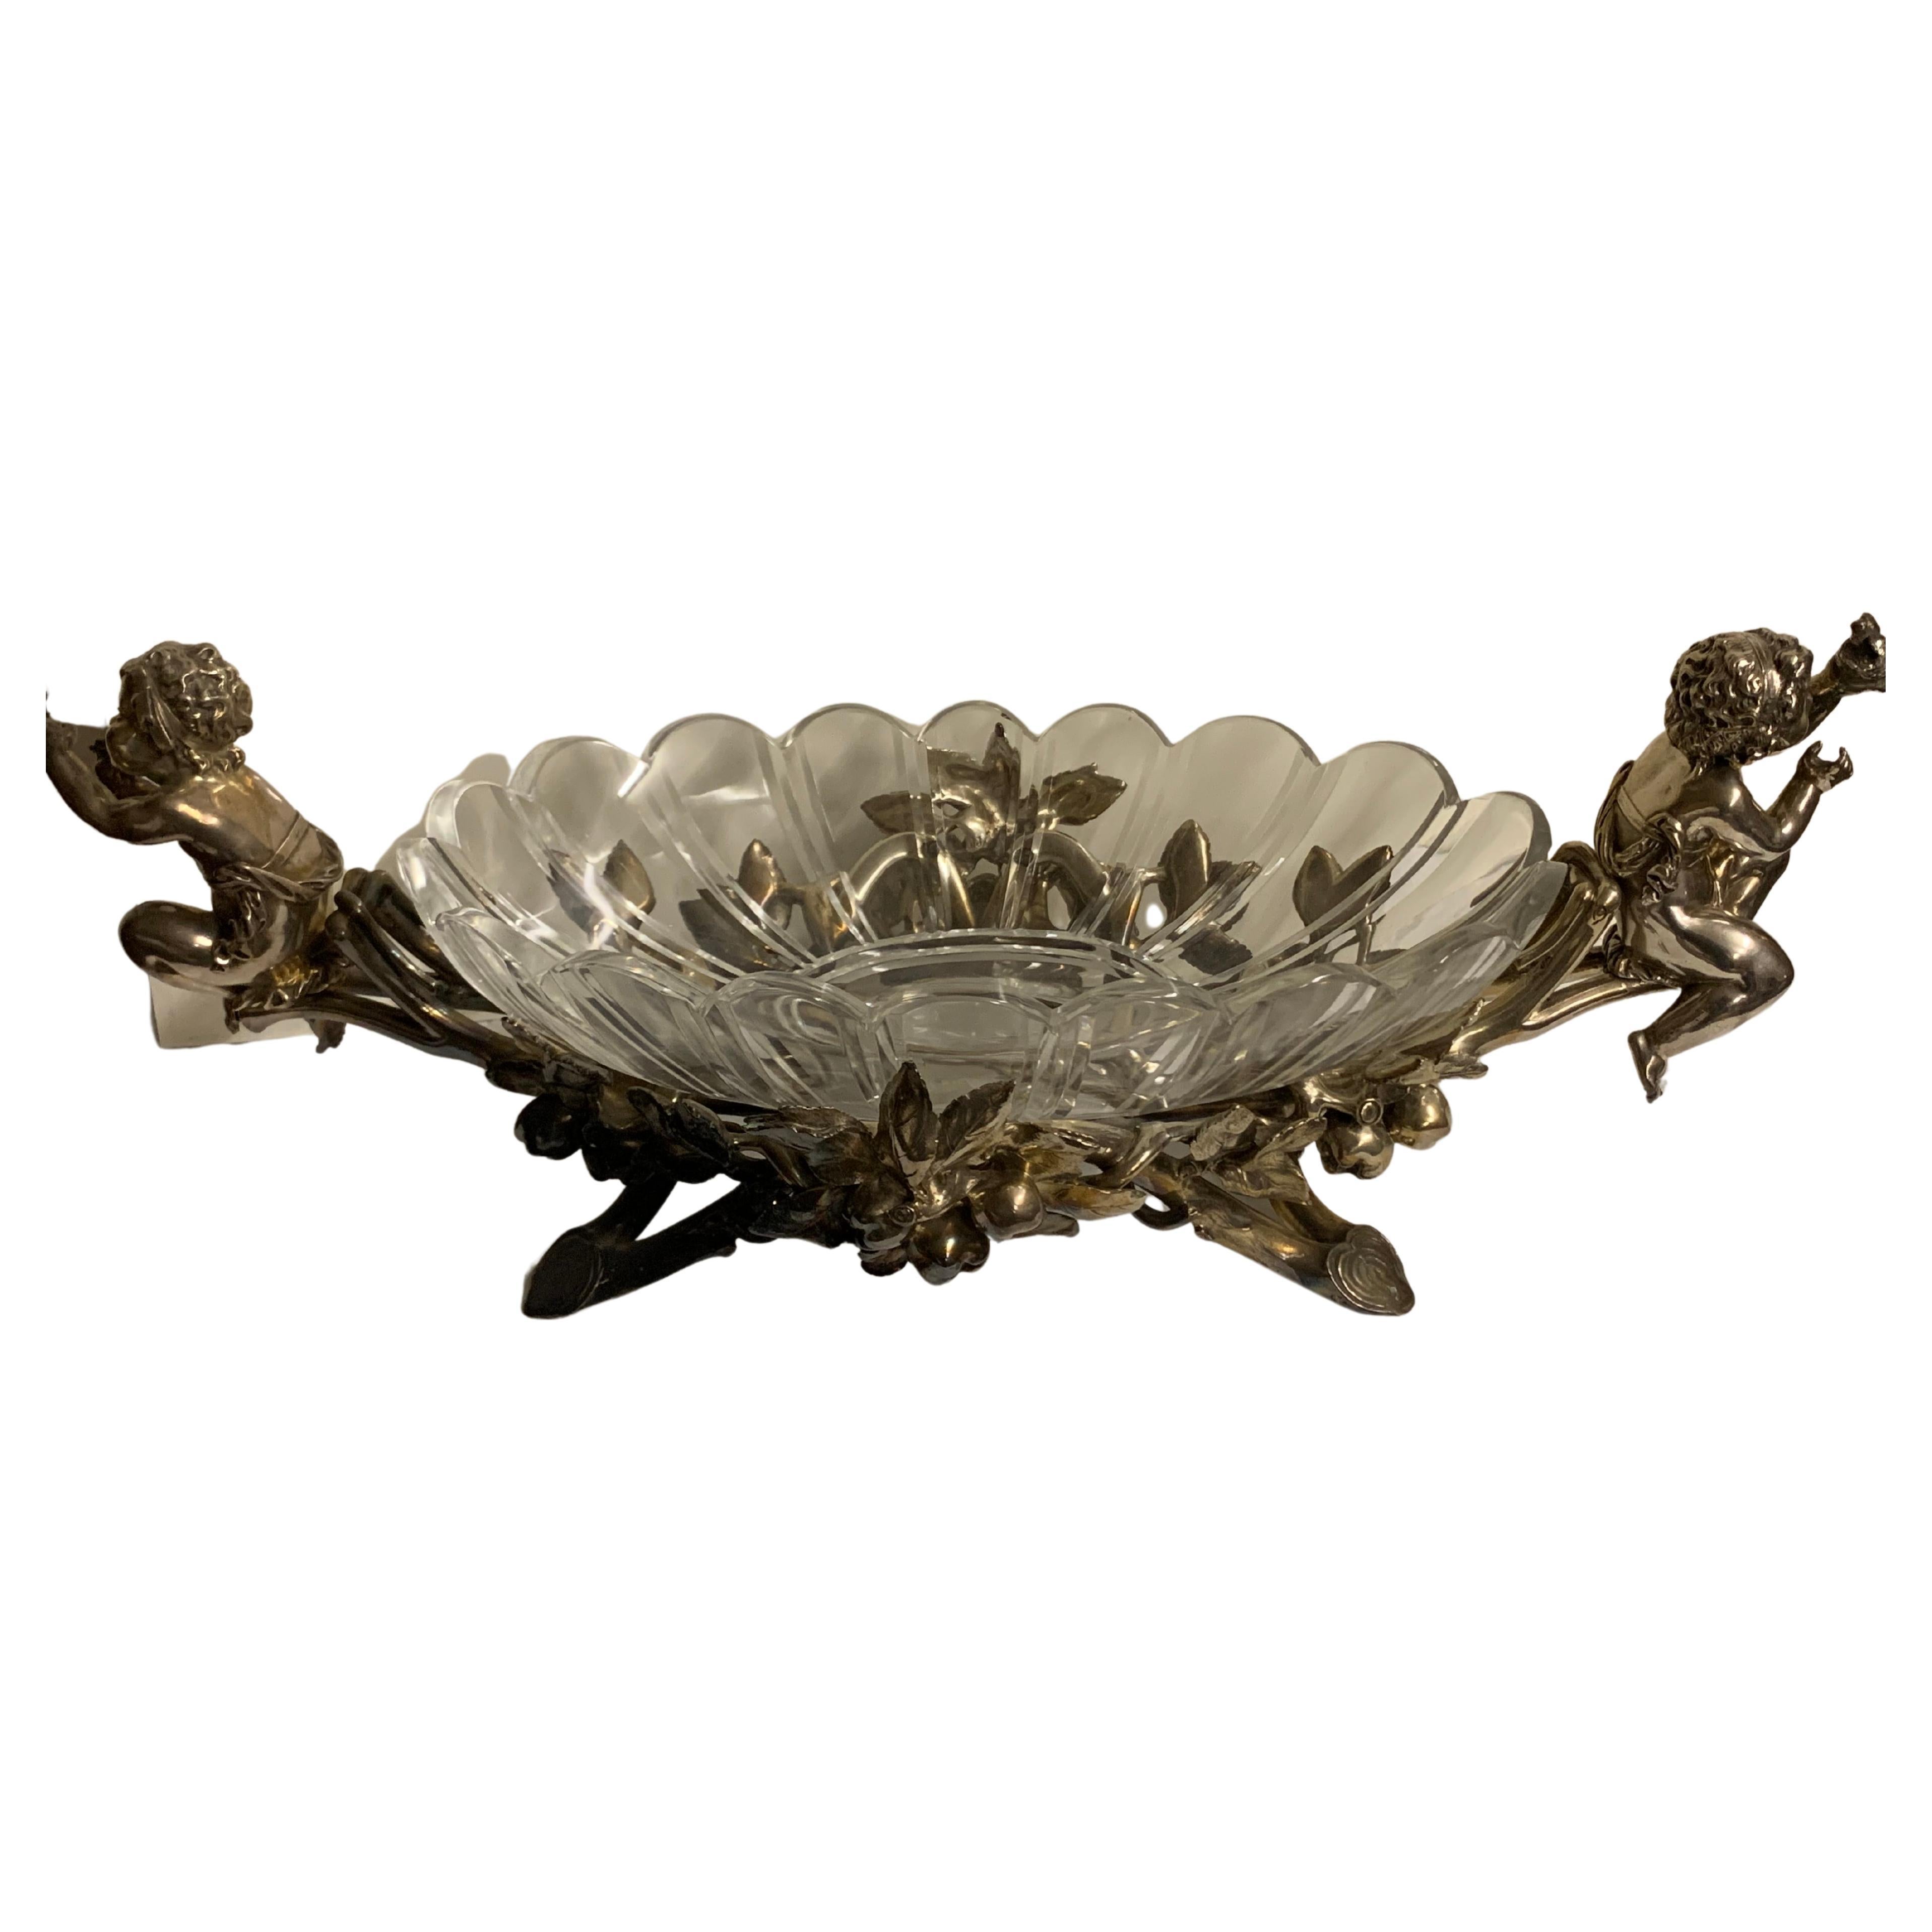 A very fine 19th-20th century Cristofle&Cie louis XV style silvered.
Figural centerpiece with a circular scalloped crystal bowl ,the center-dish flanked by two seated putti,one holding a bird and the other one a newborn chick on the nest ,the base